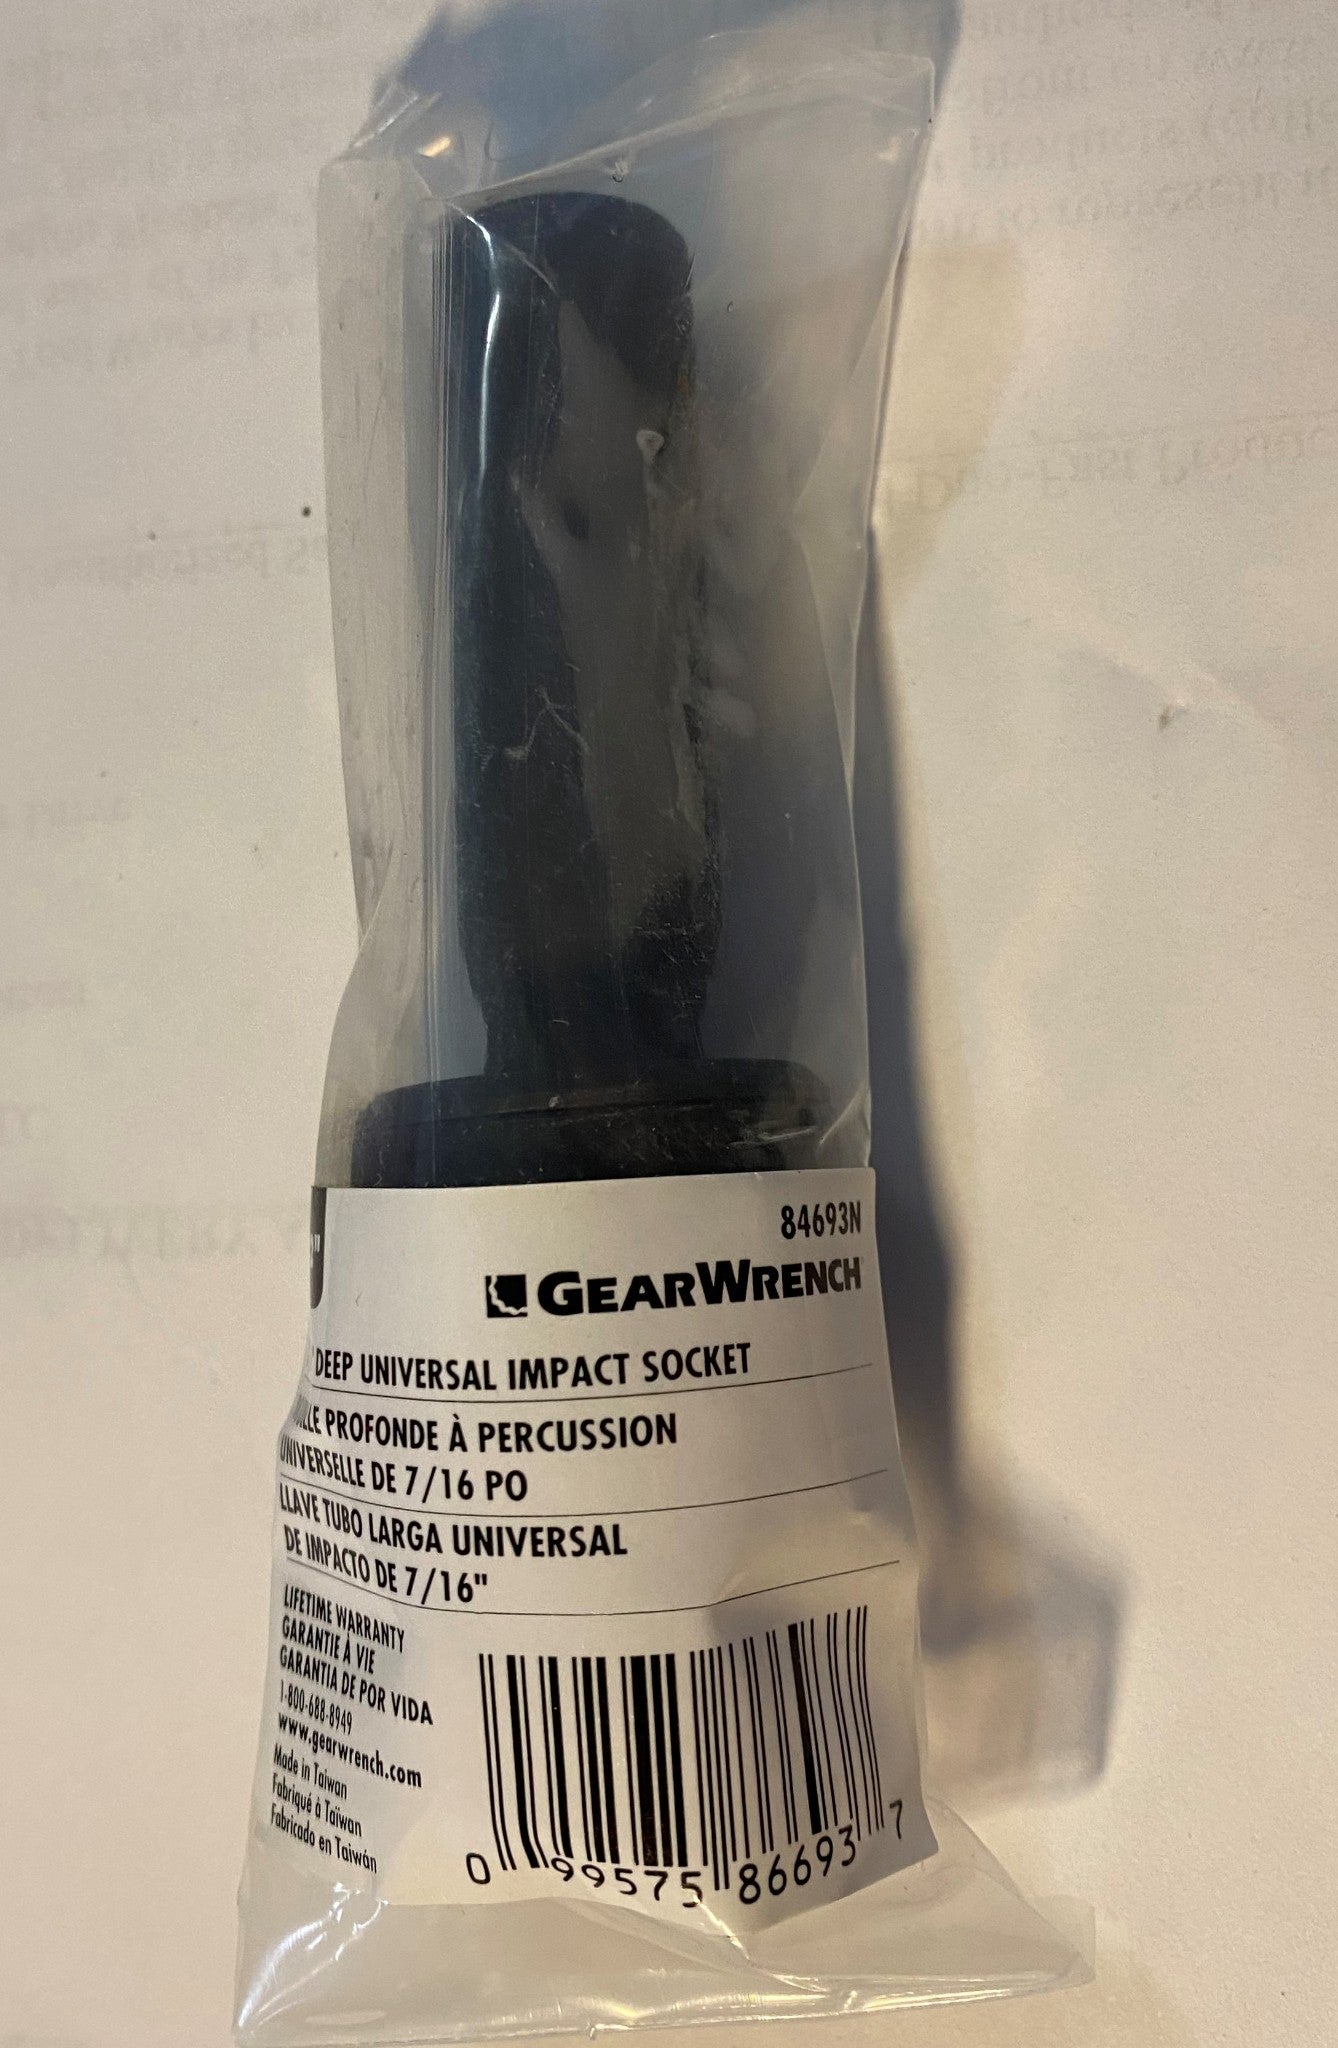 GEARWRENCH 84693N 1/2" Drive 6 Point Deep Universal Impact SAE Socket 7/16"